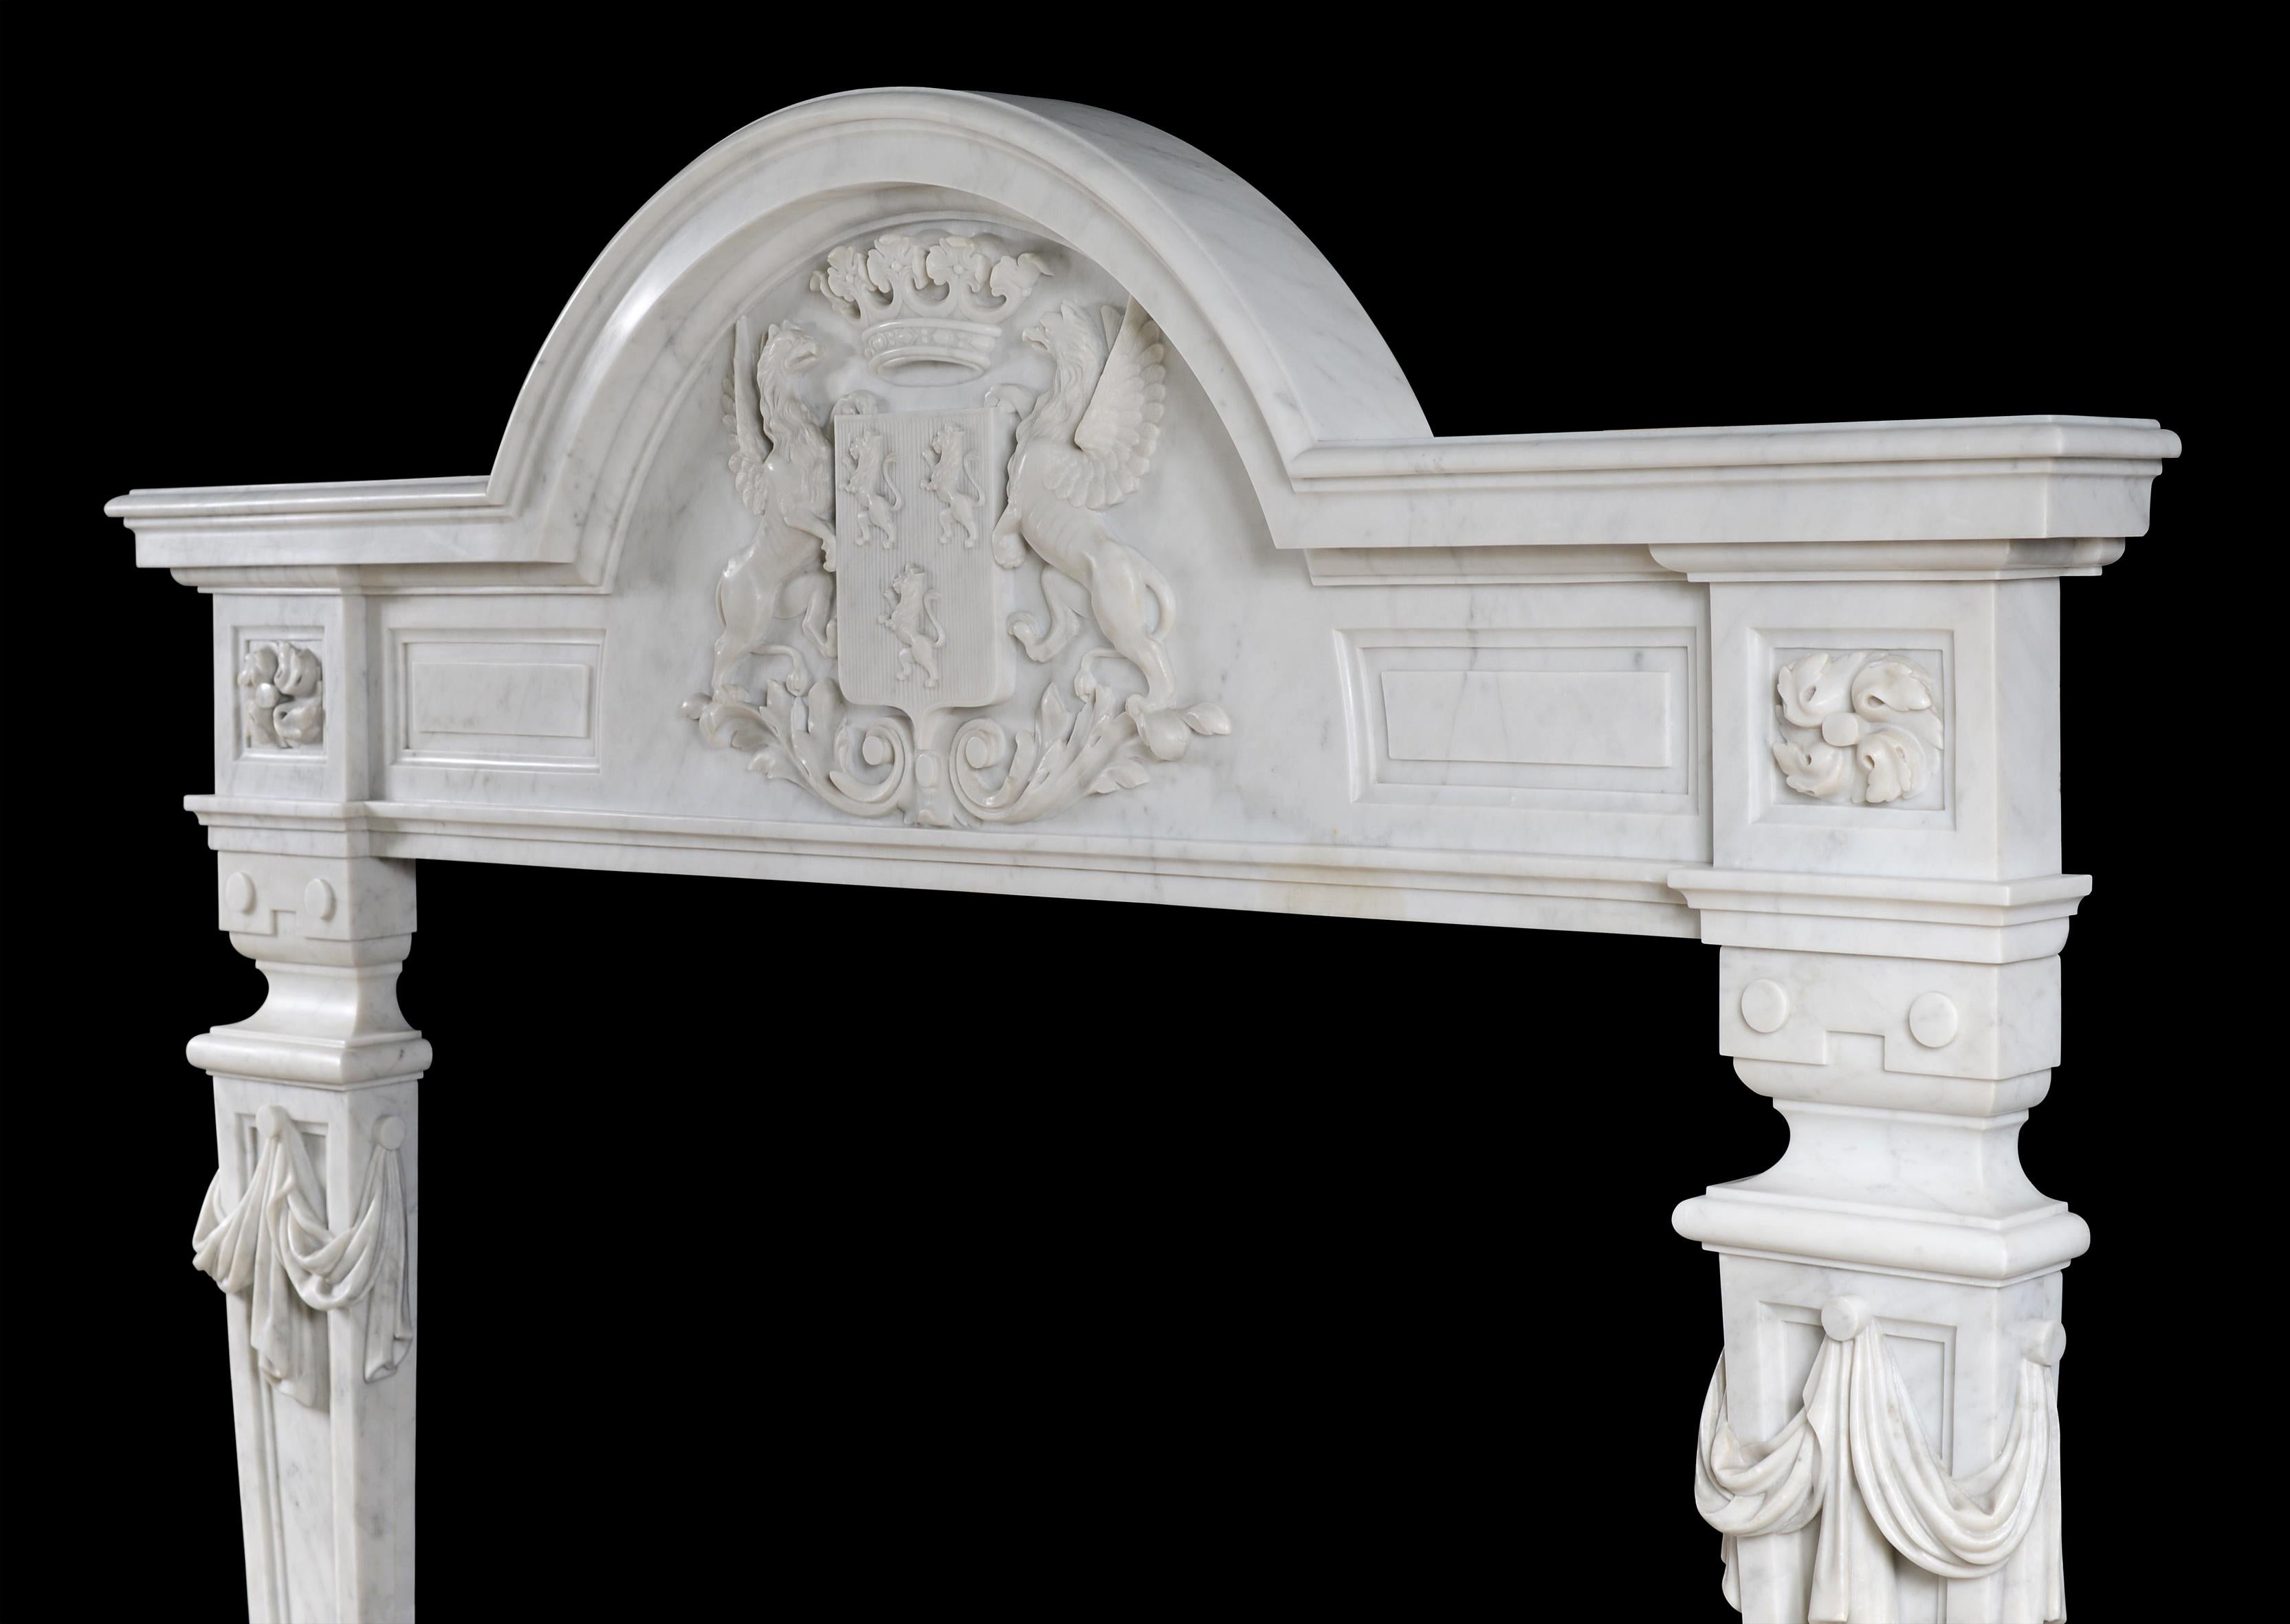 19th Century Unusual English Baroque Style Fireplace in Italian Carrara Marble For Sale